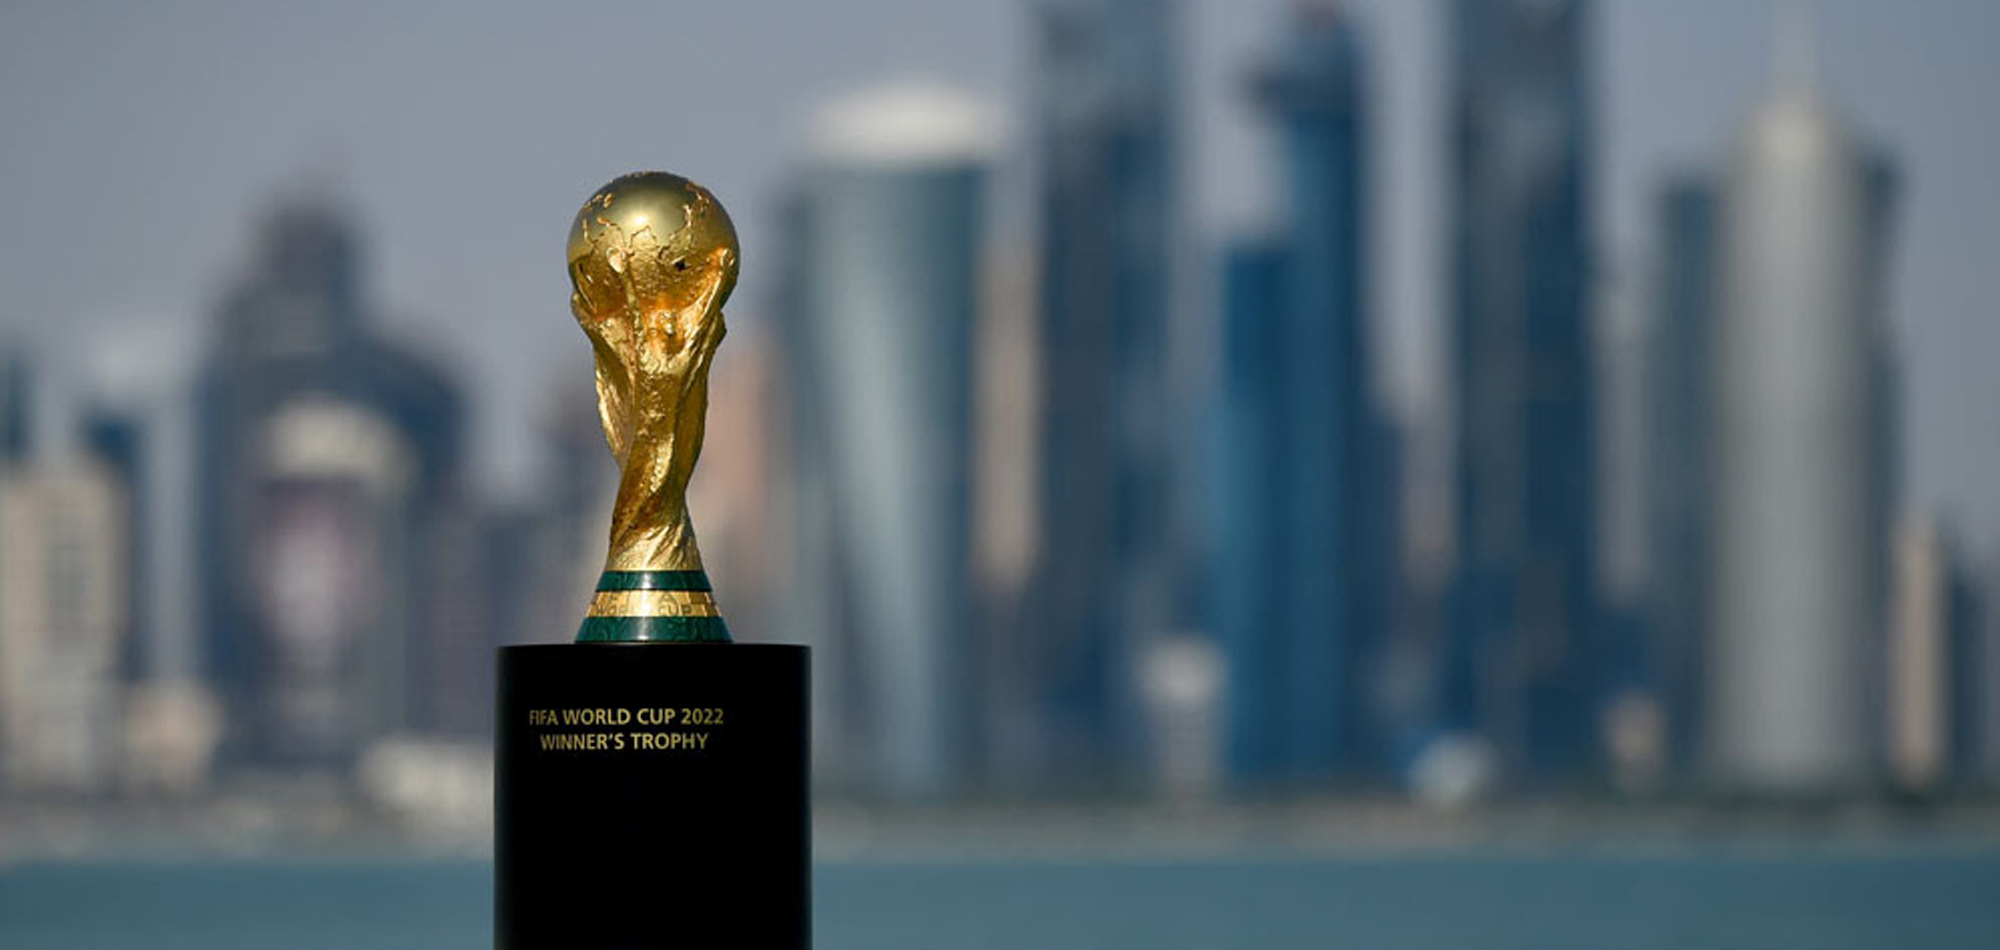 FIFA WORLD CUP QATAR 2022: 1.2 MILLION TICKETS REQUESTED WITHIN 24 HOURS